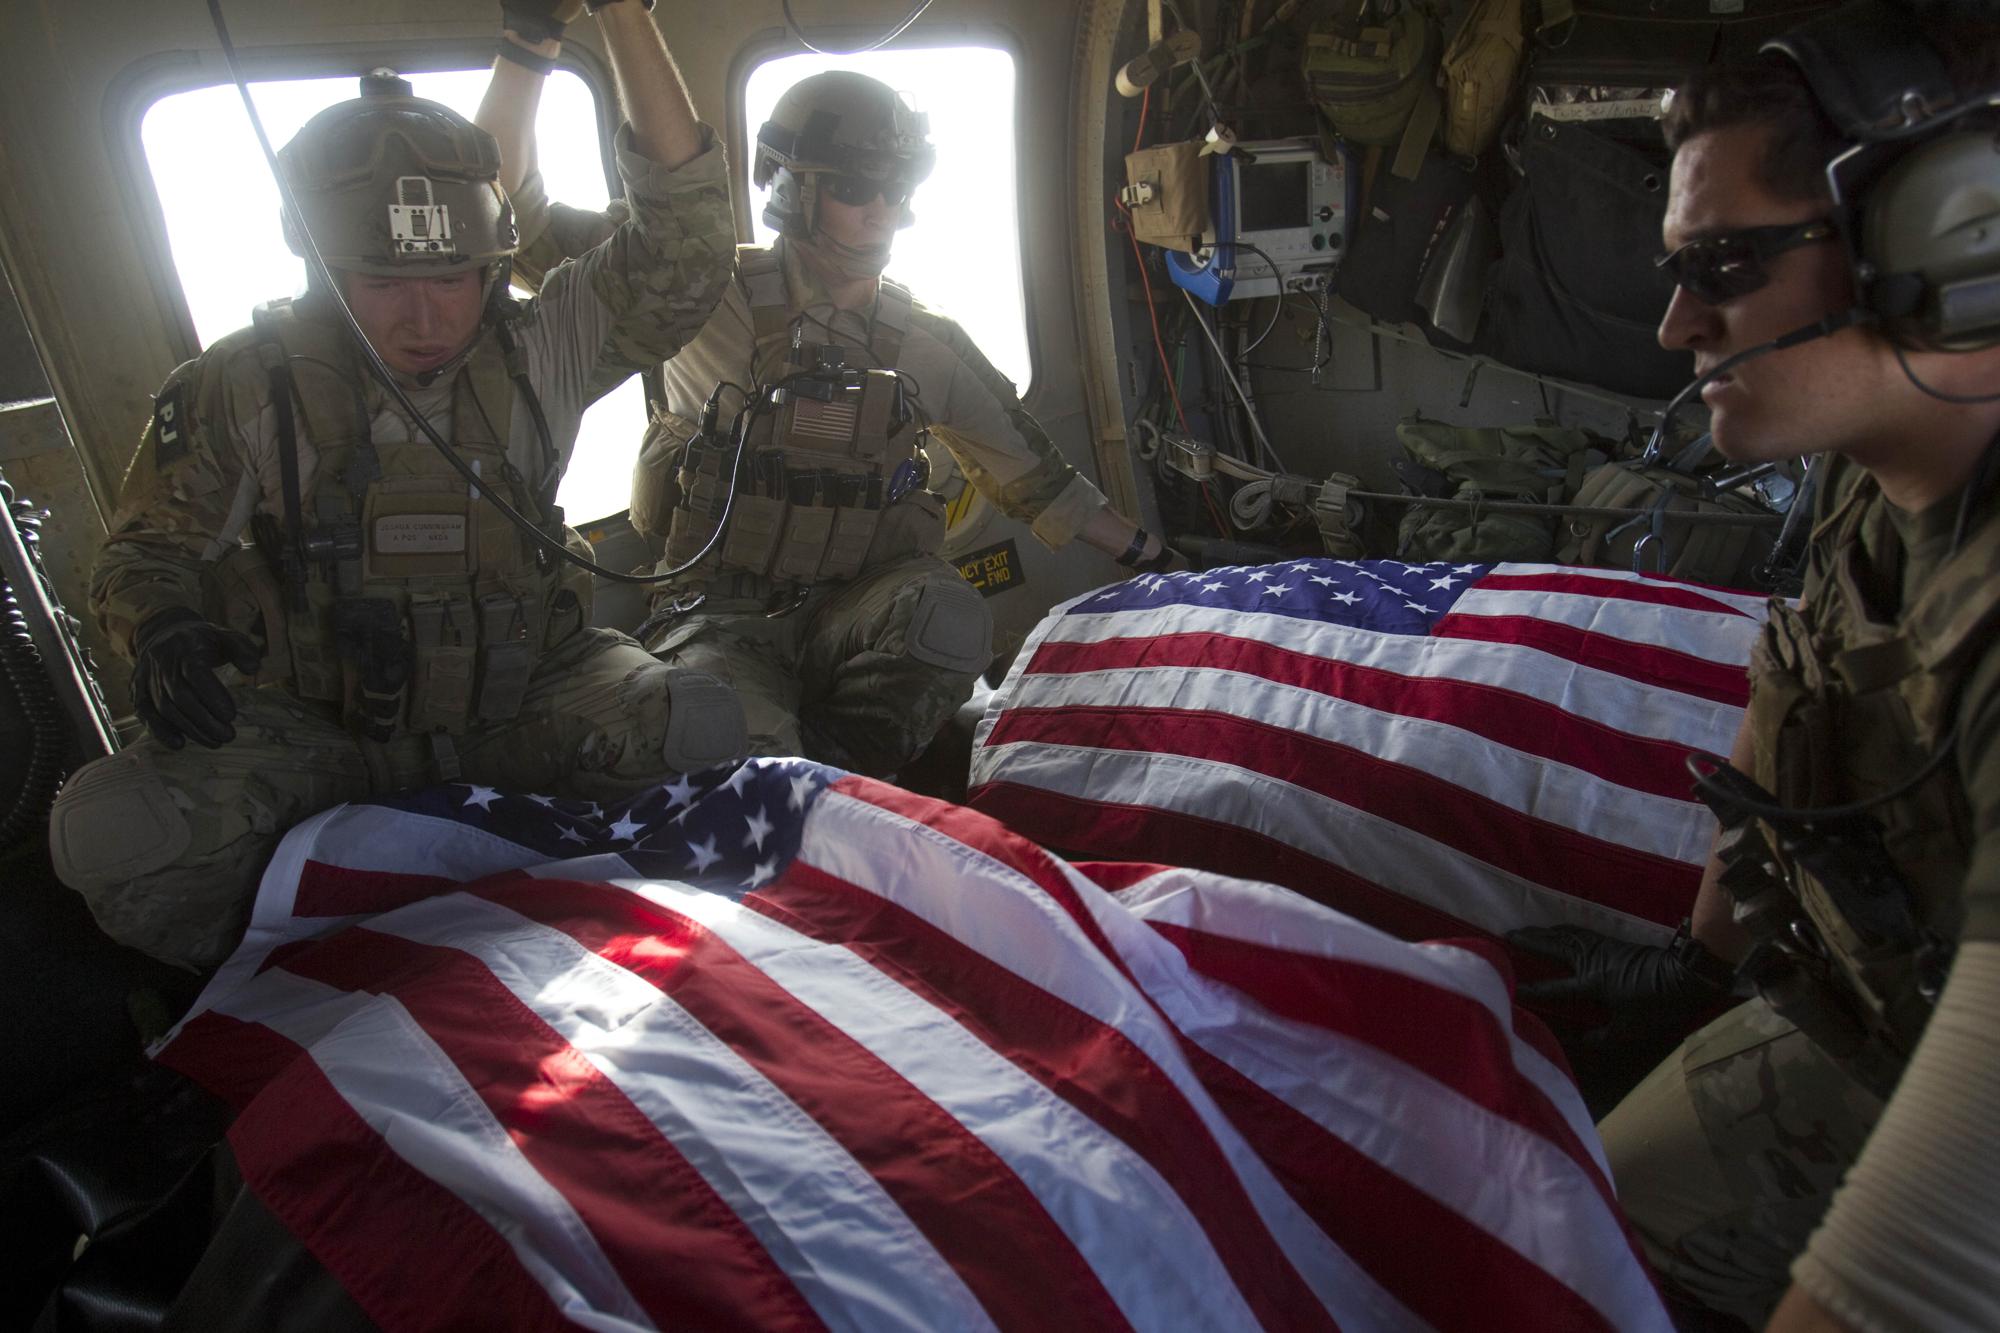 U.S. Air Force pararescue members ride in the back of their medevac helicopter with the American flag draped over bodies of U.S. soldiers who were killed in a roadside bomb attack, Oct. 10, 2010, in Afghanistan's Kandahar province